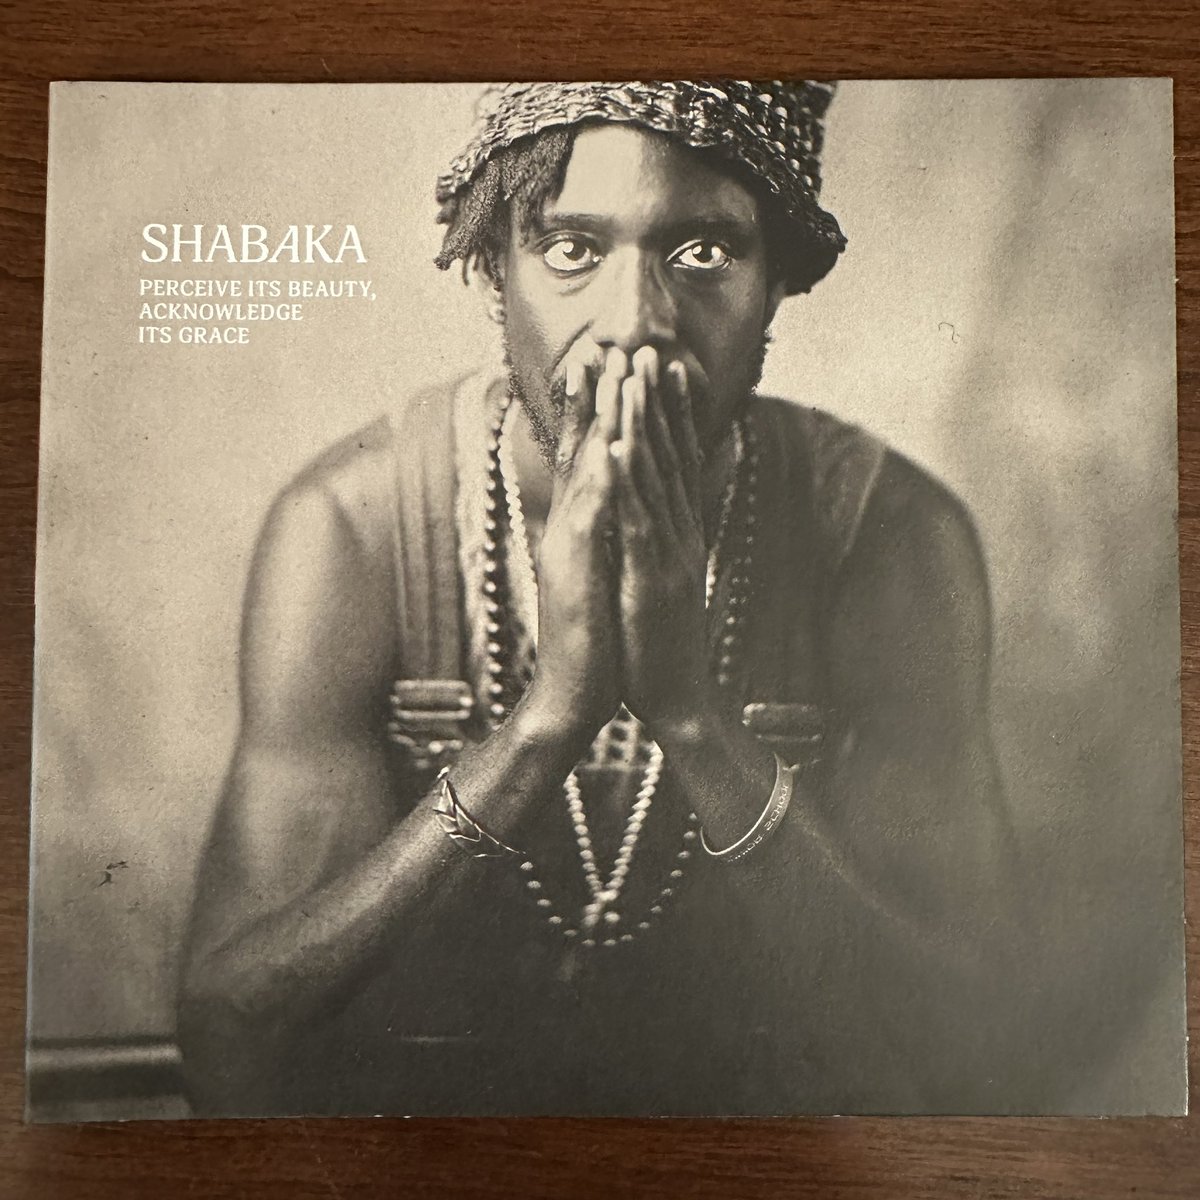 Glad this @shabakah album landed in my collection today. It’s such a beautiful piece of work. I love that the guy I associate with fierce apocalyptic dance saxophone is making such gentle and thoughtful music. This album is remarkable, with such a cool list of guest artists.